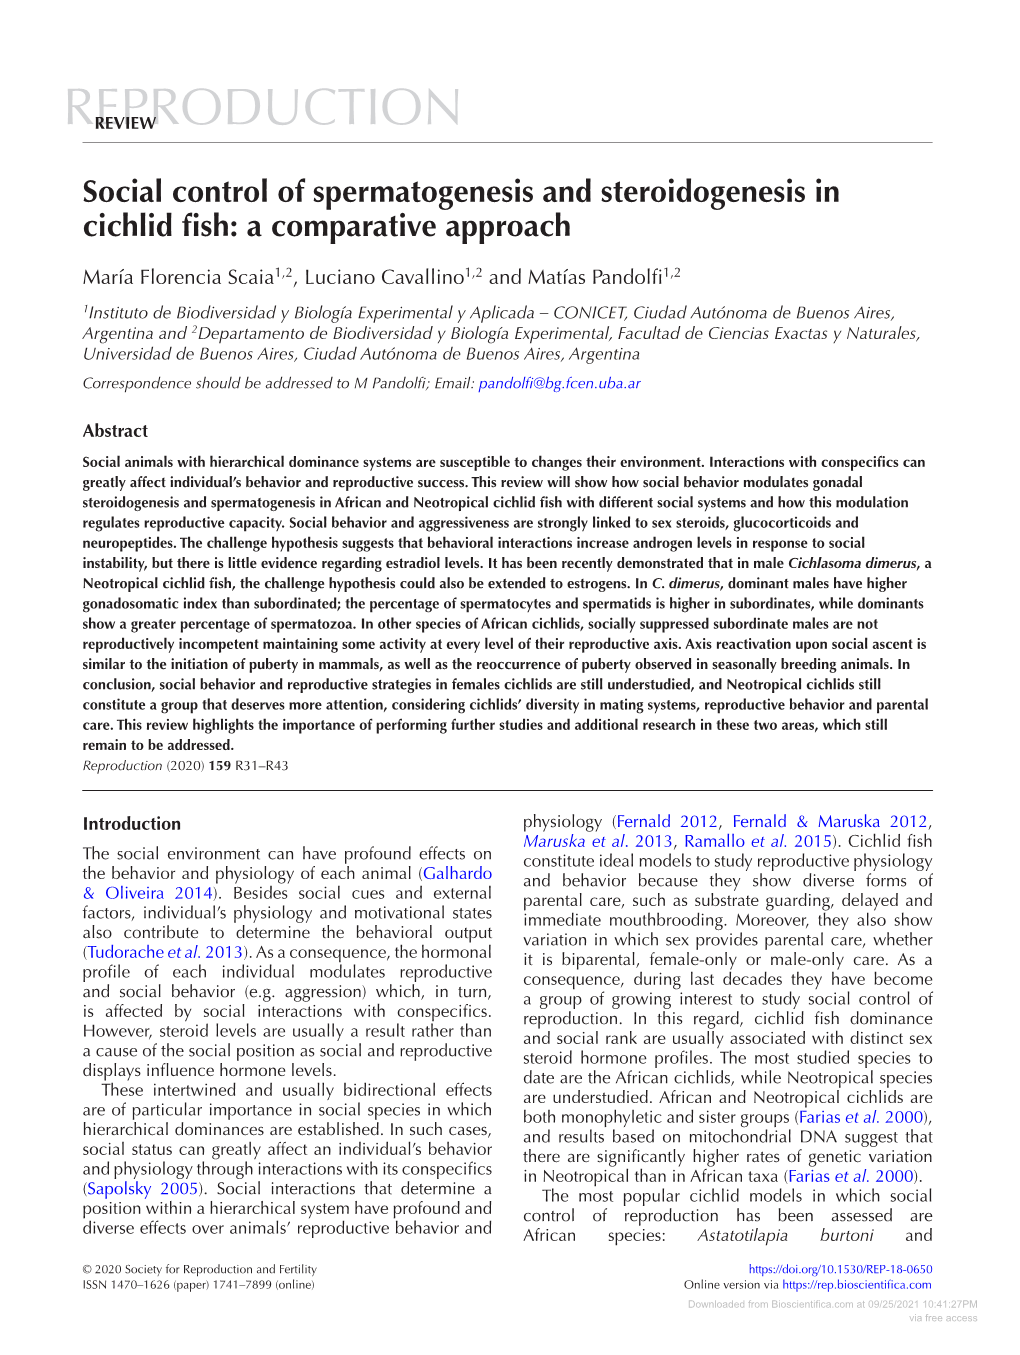 Social Control of Spermatogenesis and Steroidogenesis in Cichlid Fish: a Comparative Approach